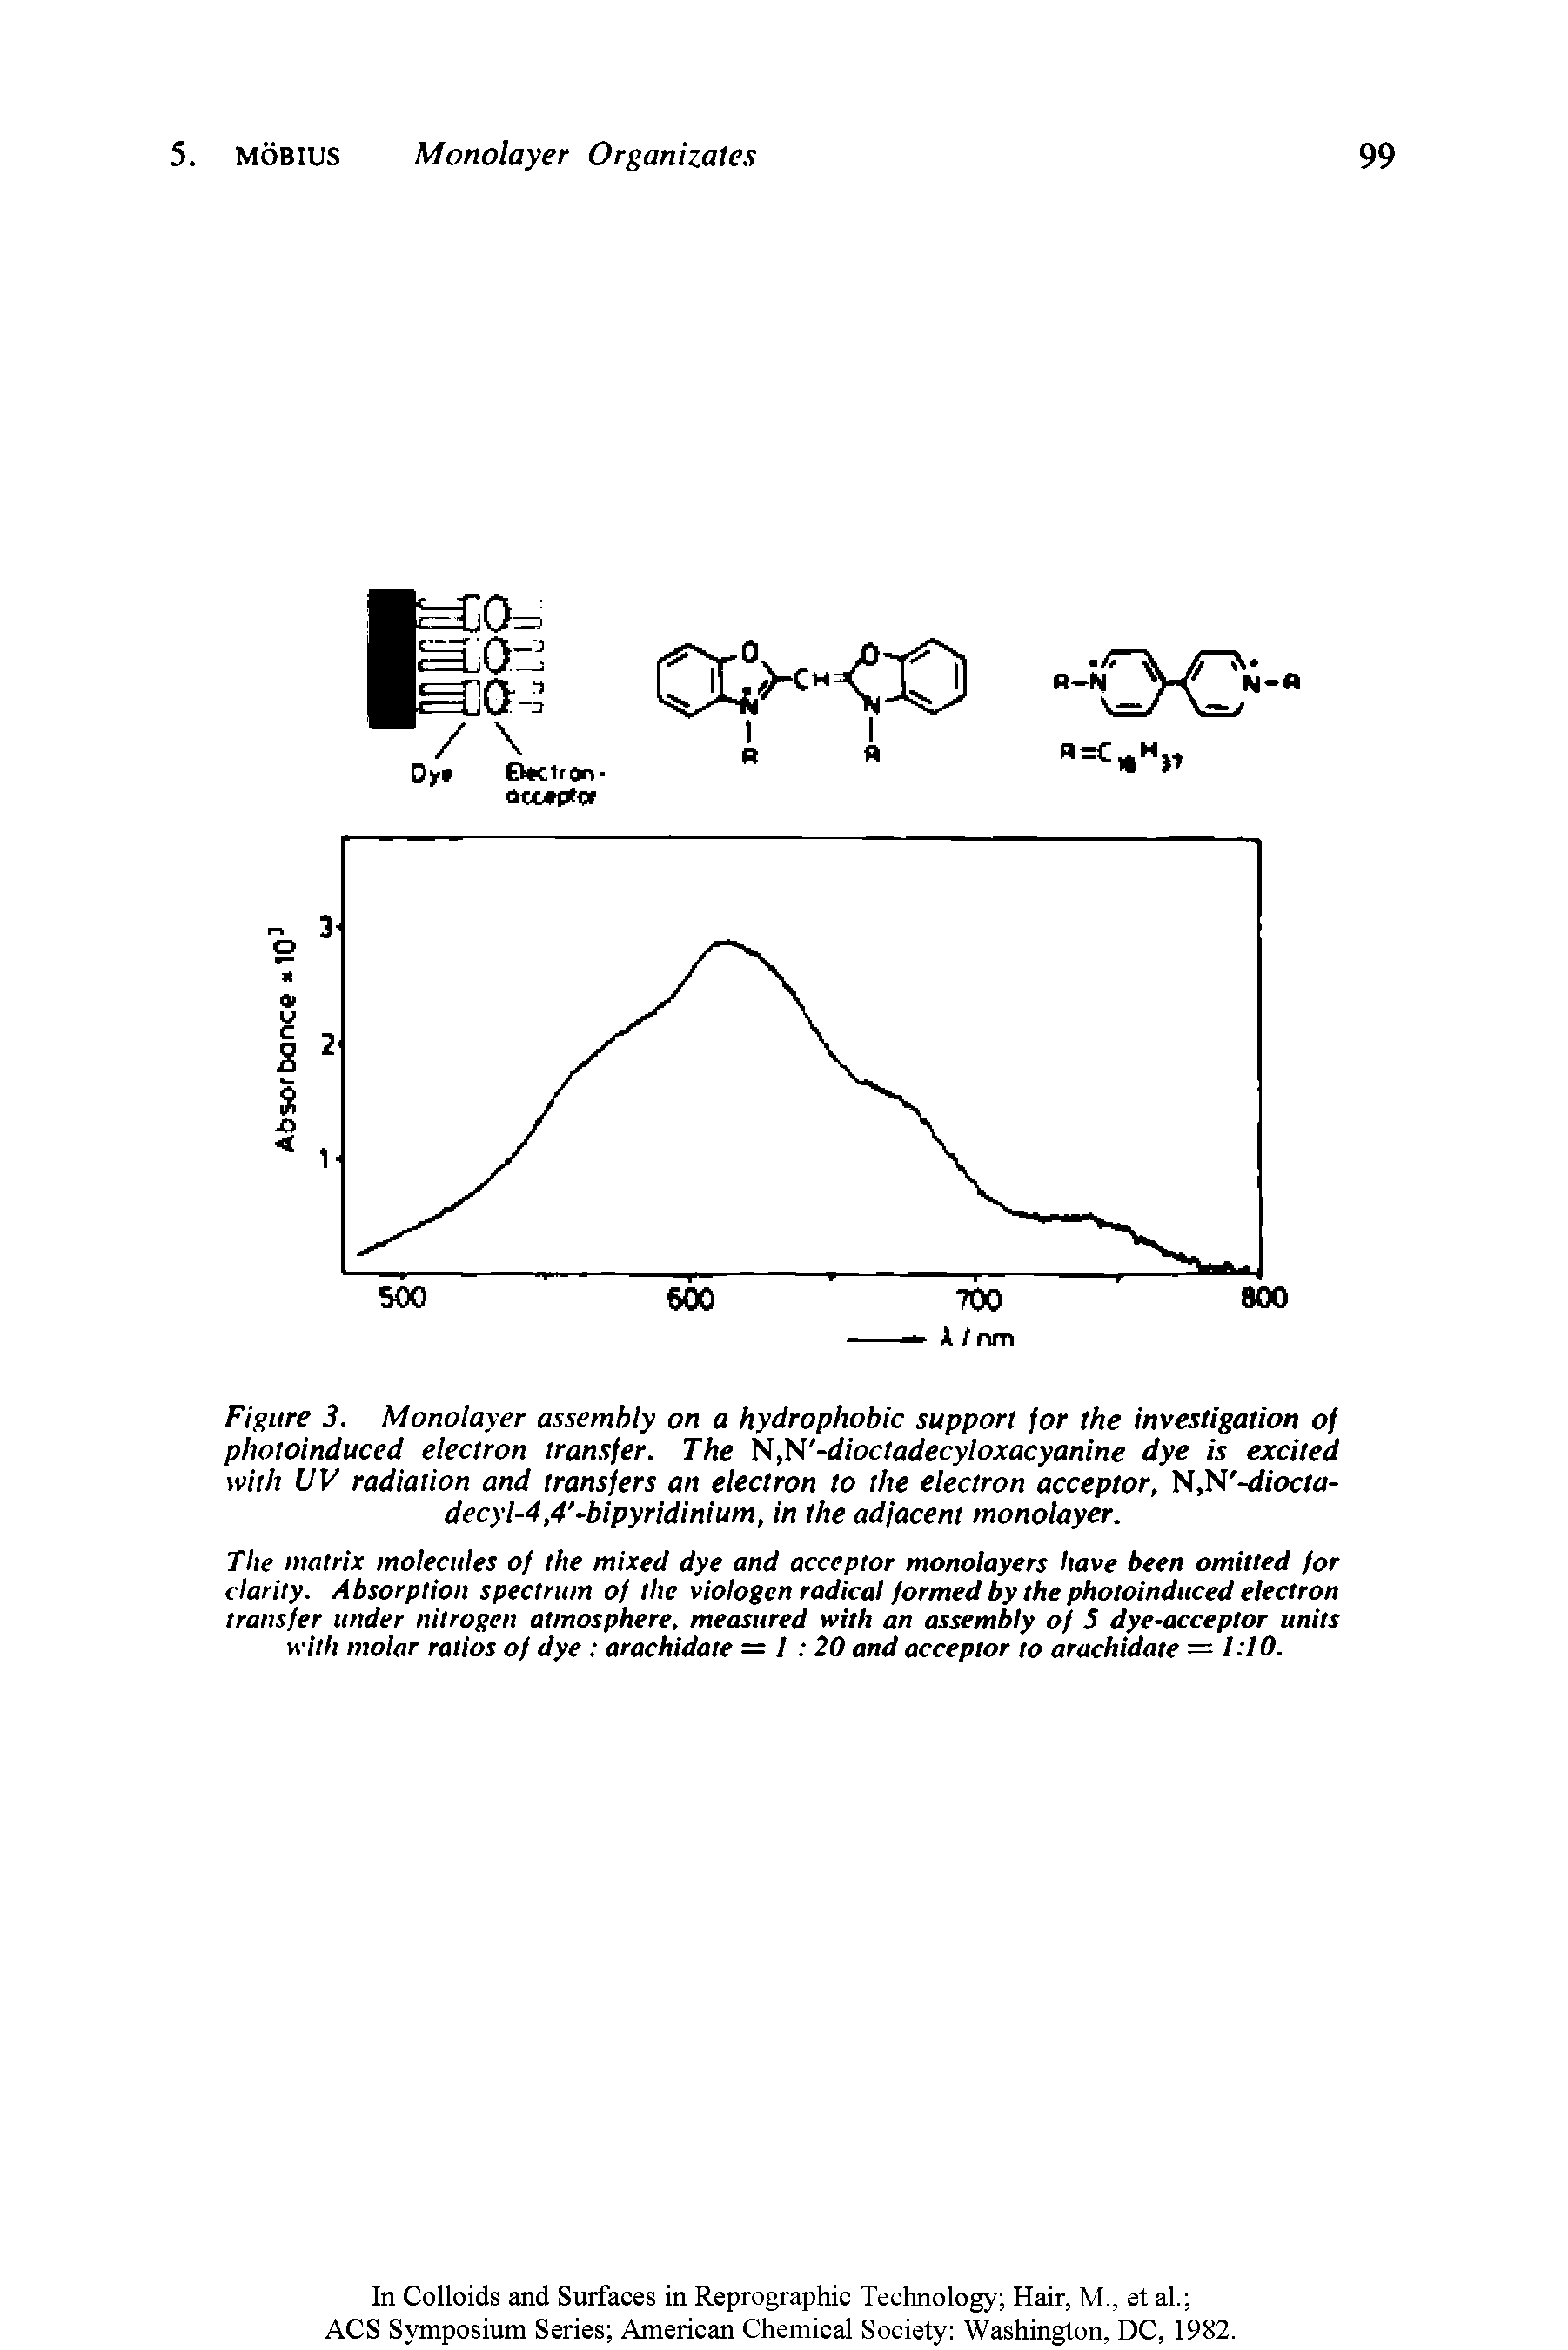 Figure 3. Monolayer assembly on a hydrophobic support for the investigation of photoinduced electron transfer. The N,N -dioctadecyIoxacyanine dye is excited with UV radiation and transfers an electron to the electron acceptor, N,N -diocta-decyl-4,4 -bipyridinium, in the adjacent monolayer.